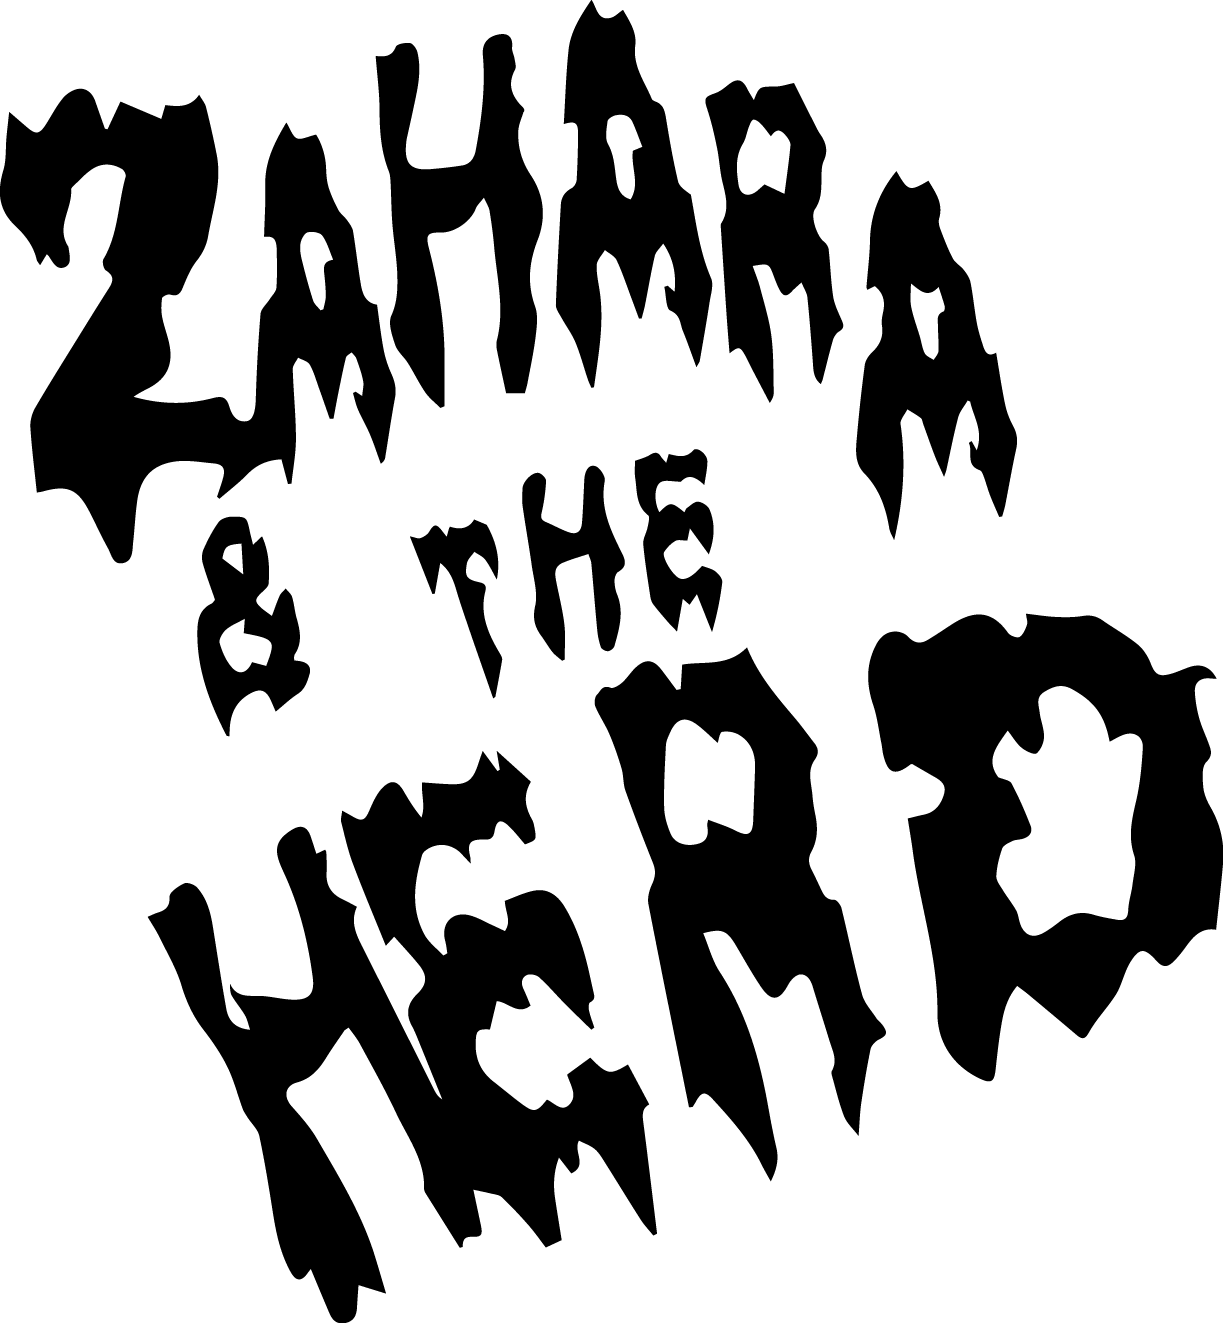 ZAHARA & THE HERD LOGO DESIGN WORDS ONLY BLACK.png